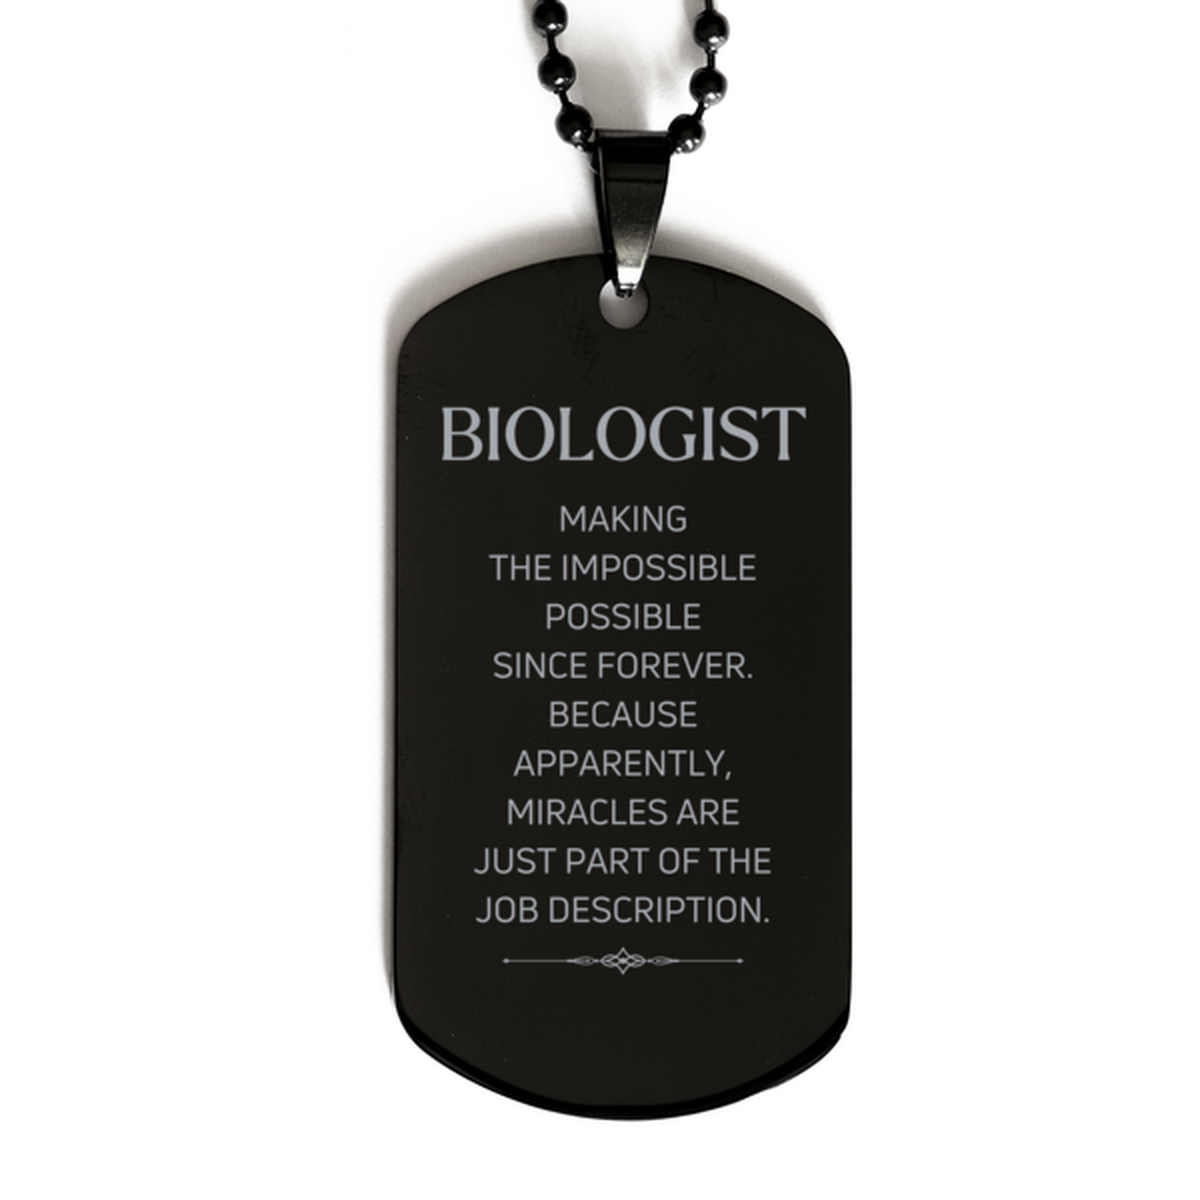 Funny Biologist Gifts, Miracles are just part of the job description, Inspirational Birthday Black Dog Tag For Biologist, Men, Women, Coworkers, Friends, Boss